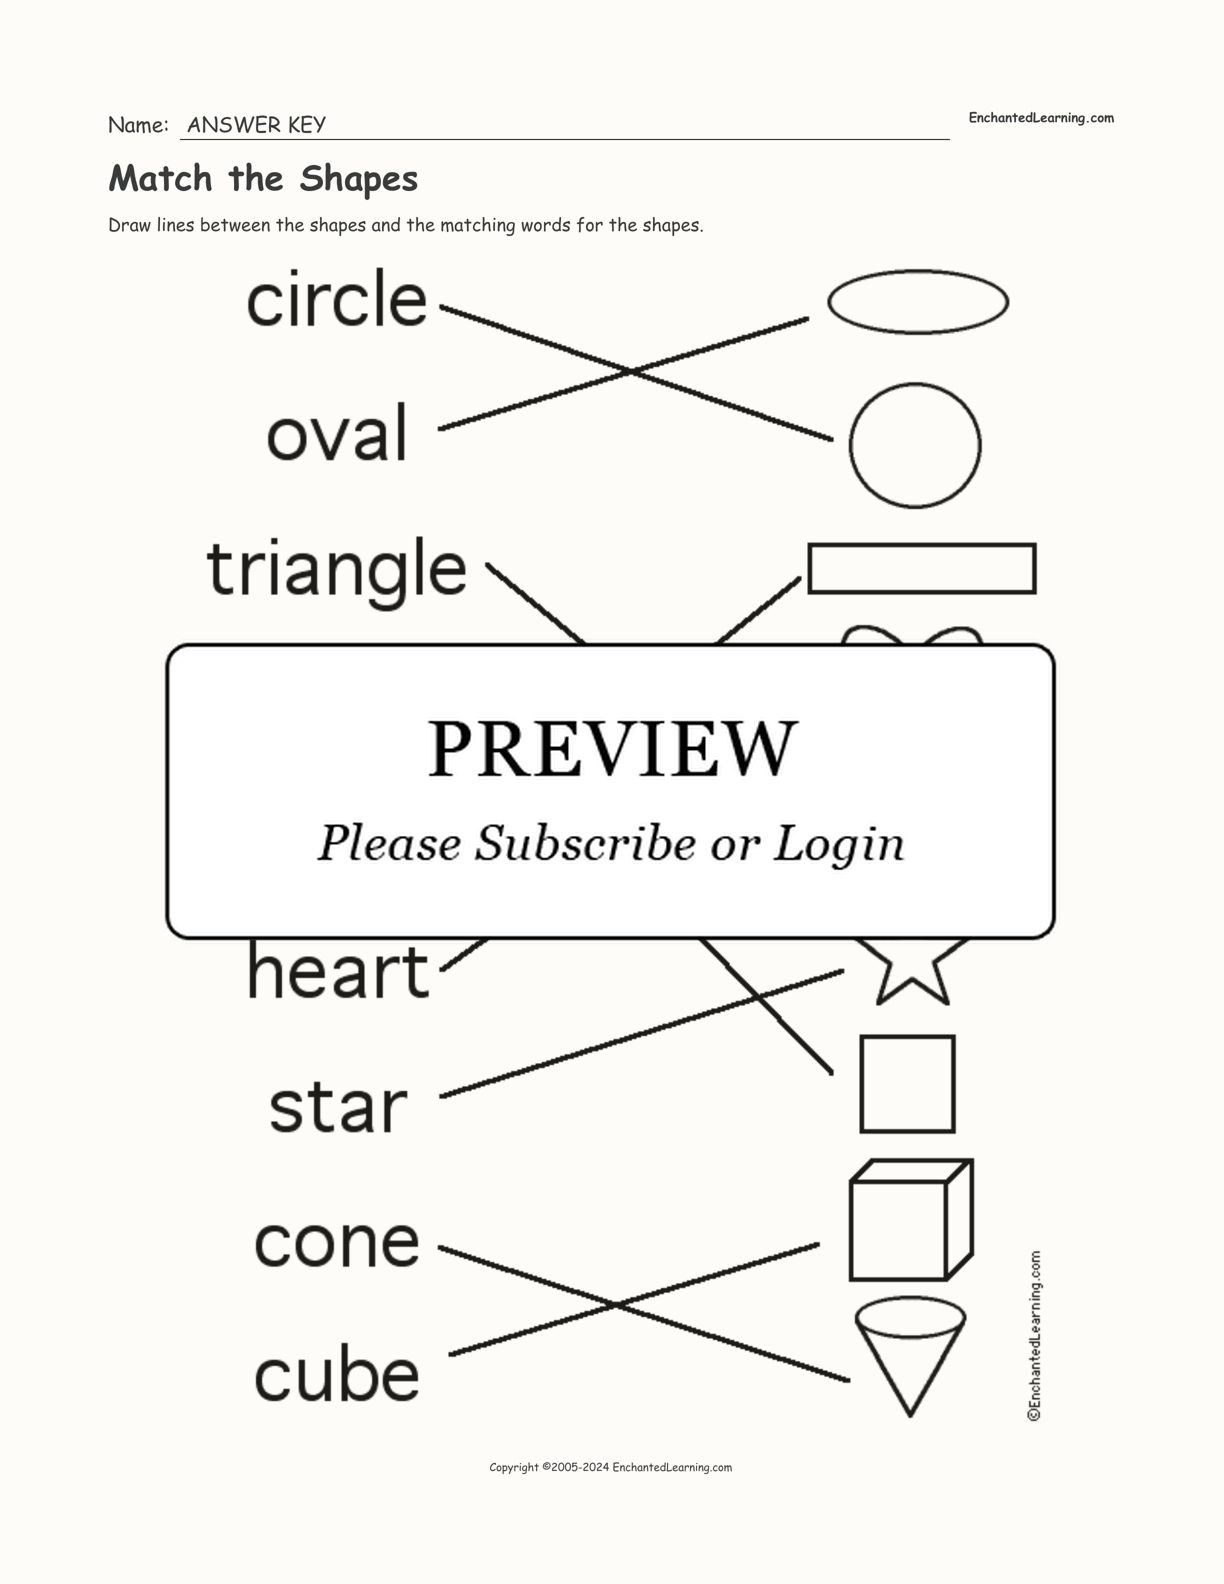 Match the Shapes interactive worksheet page 2